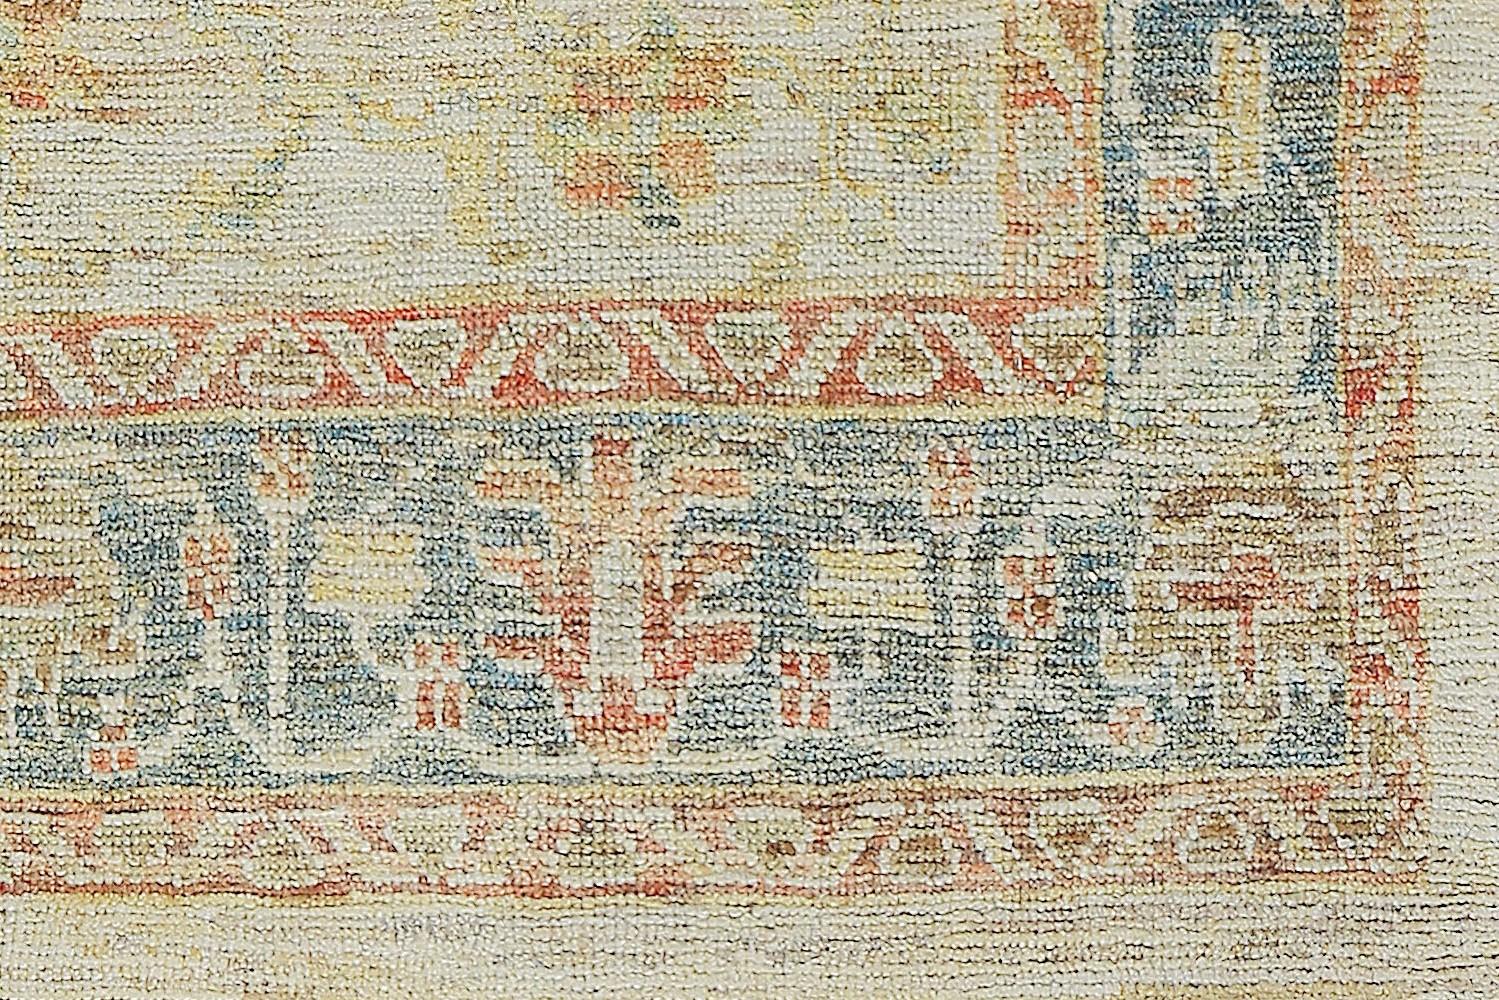 Modern Oushak / Country of origin: Turkey / Circa date: Modern. Size: 6 ft 9 in x 8 ft 10 in (2.06 m x 2.69 m)

The design and colors of this modern Oushak rug are closer to a historical design, but the artist used a weaving technique that blends